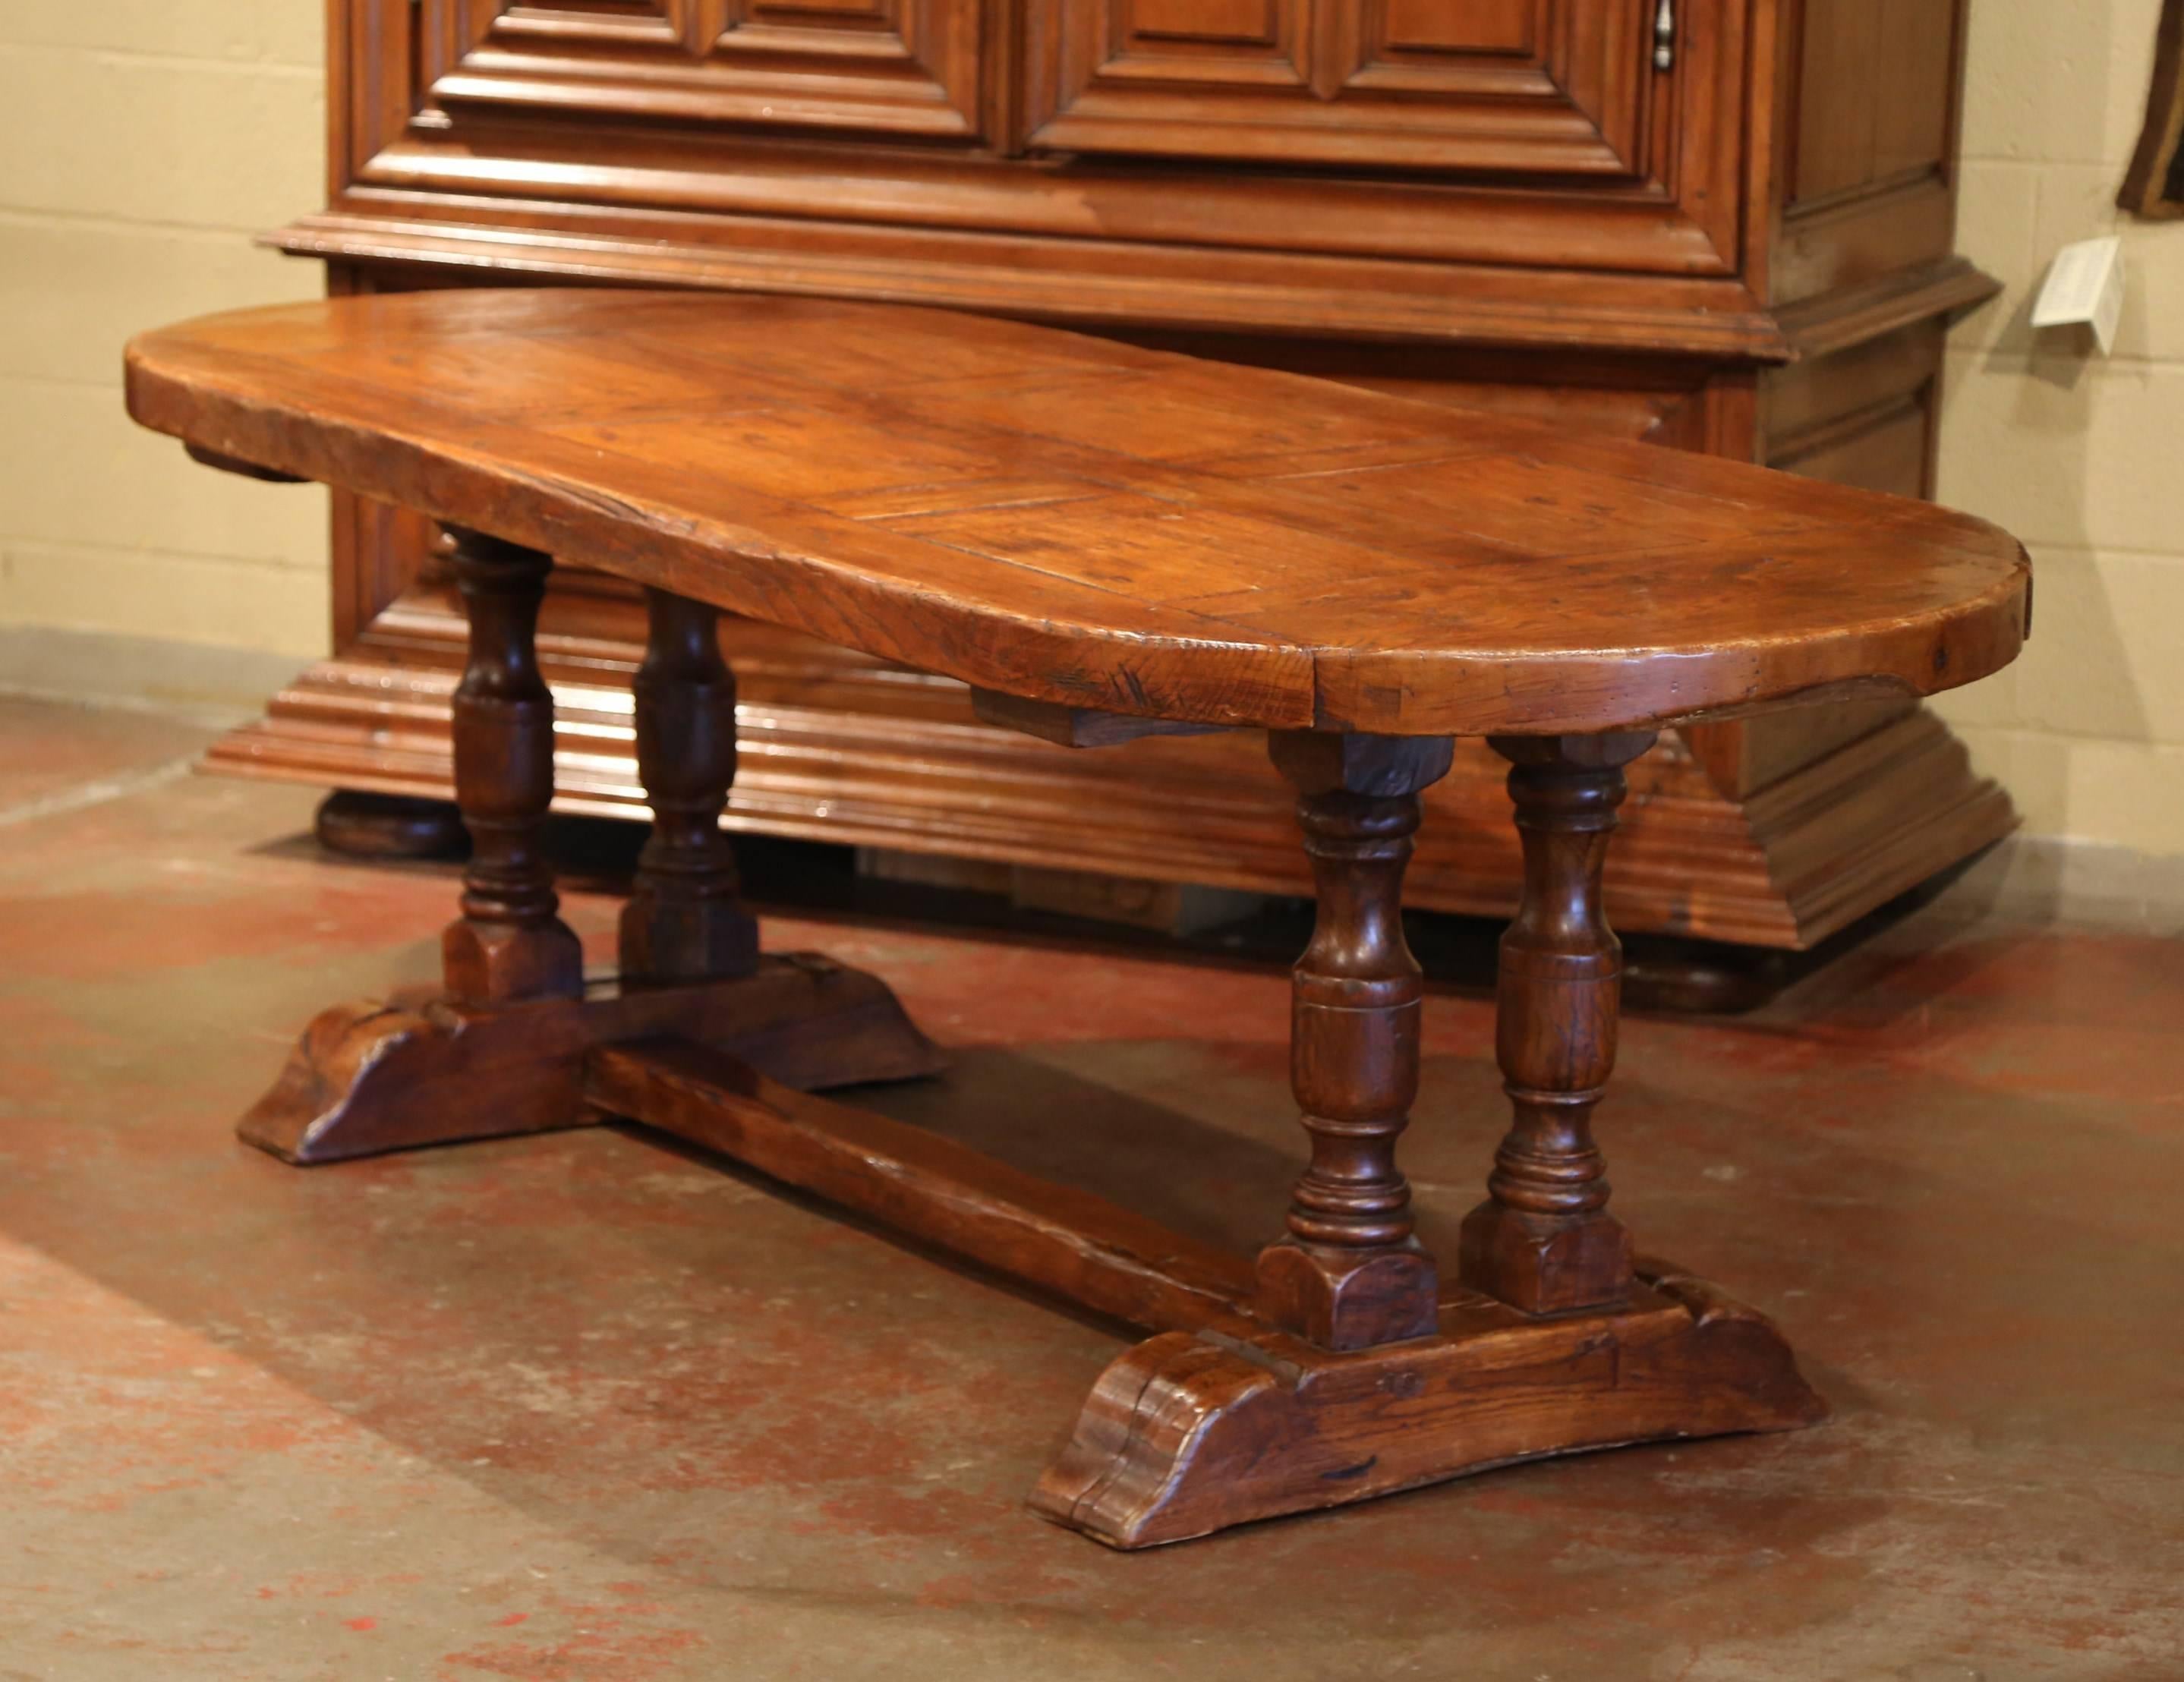 Hand-Carved Mid-20th Century French Oval Chestnut and Oak Rustic Trestle Farm Table